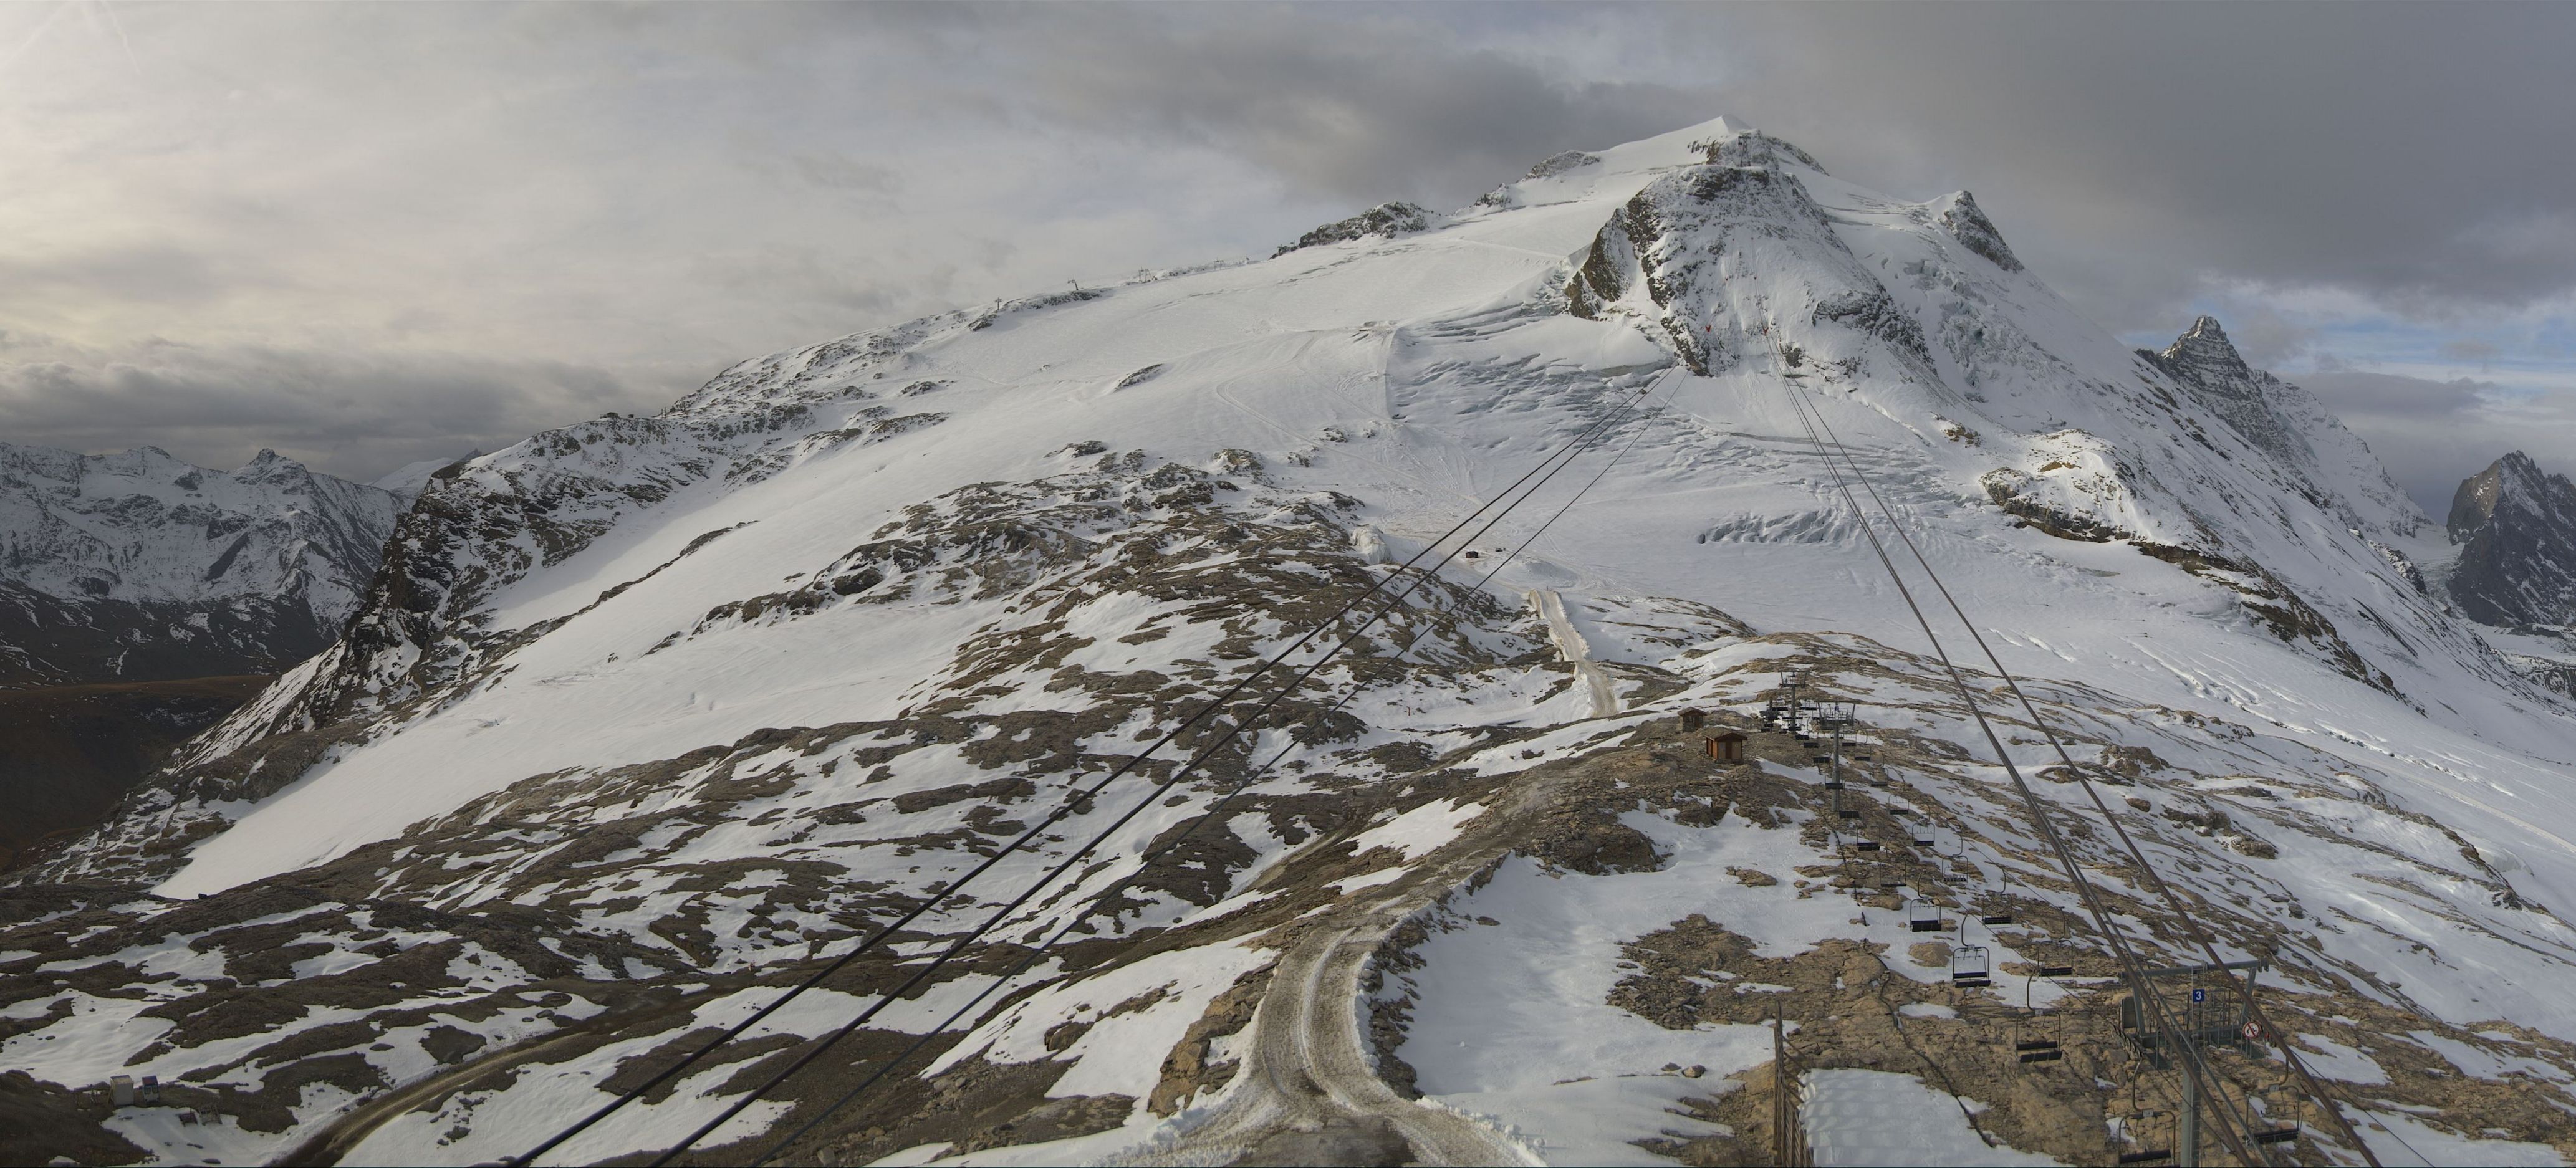 So far there is very little snow on the Grand Motte in Tignes (roundshot.com)